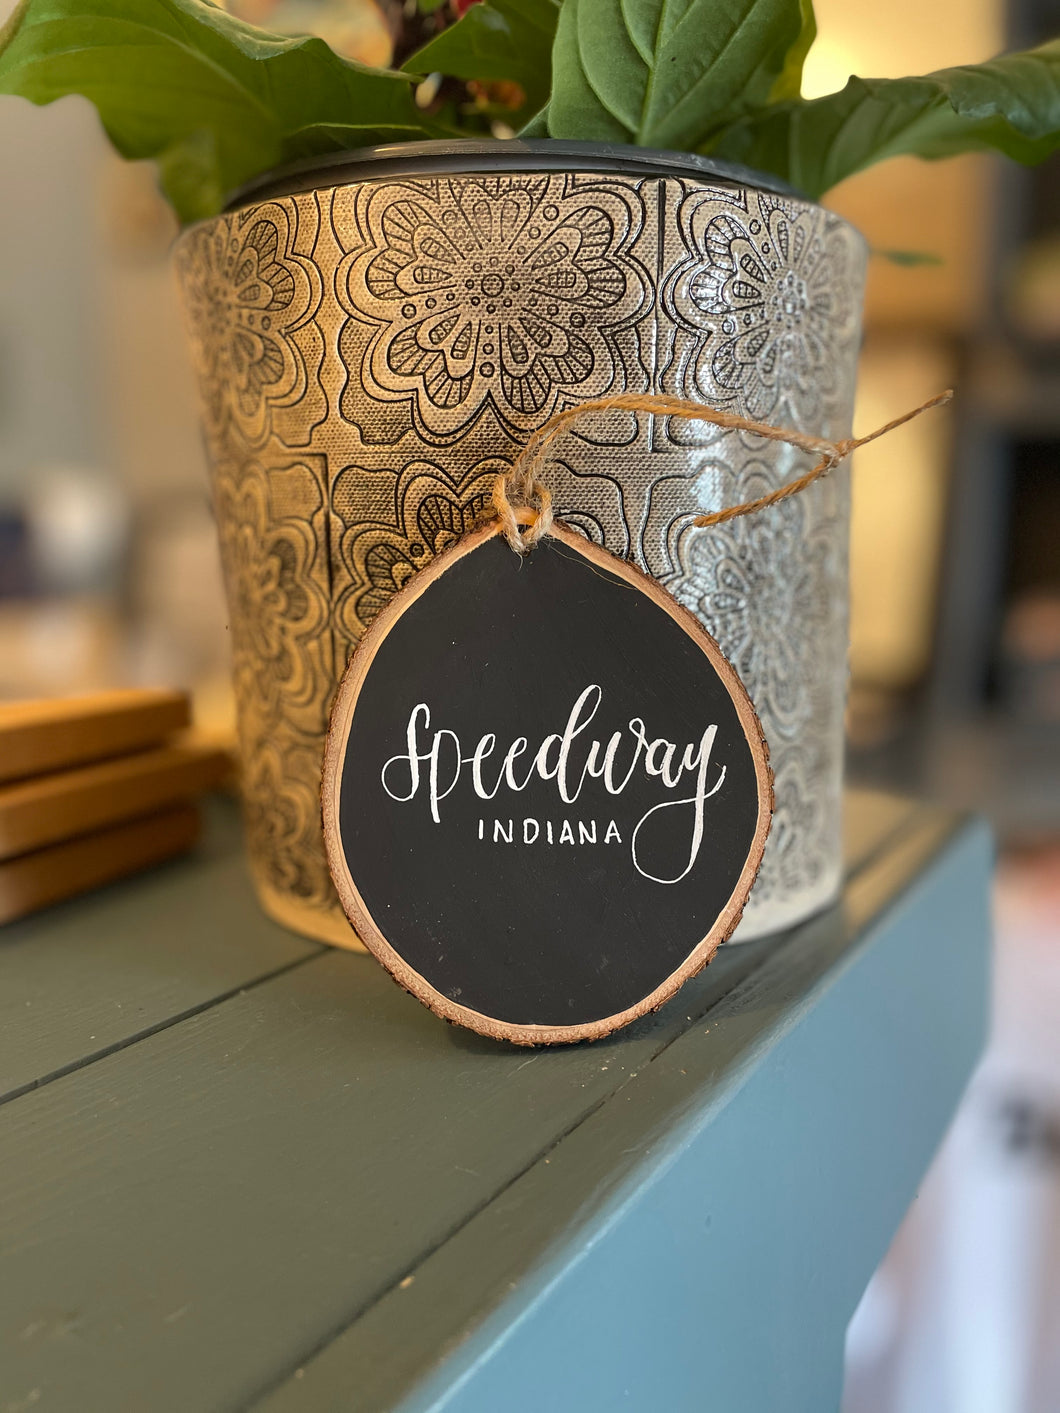 Speedway, IN Wood Slice Ornament | By Leaf Calligraphy